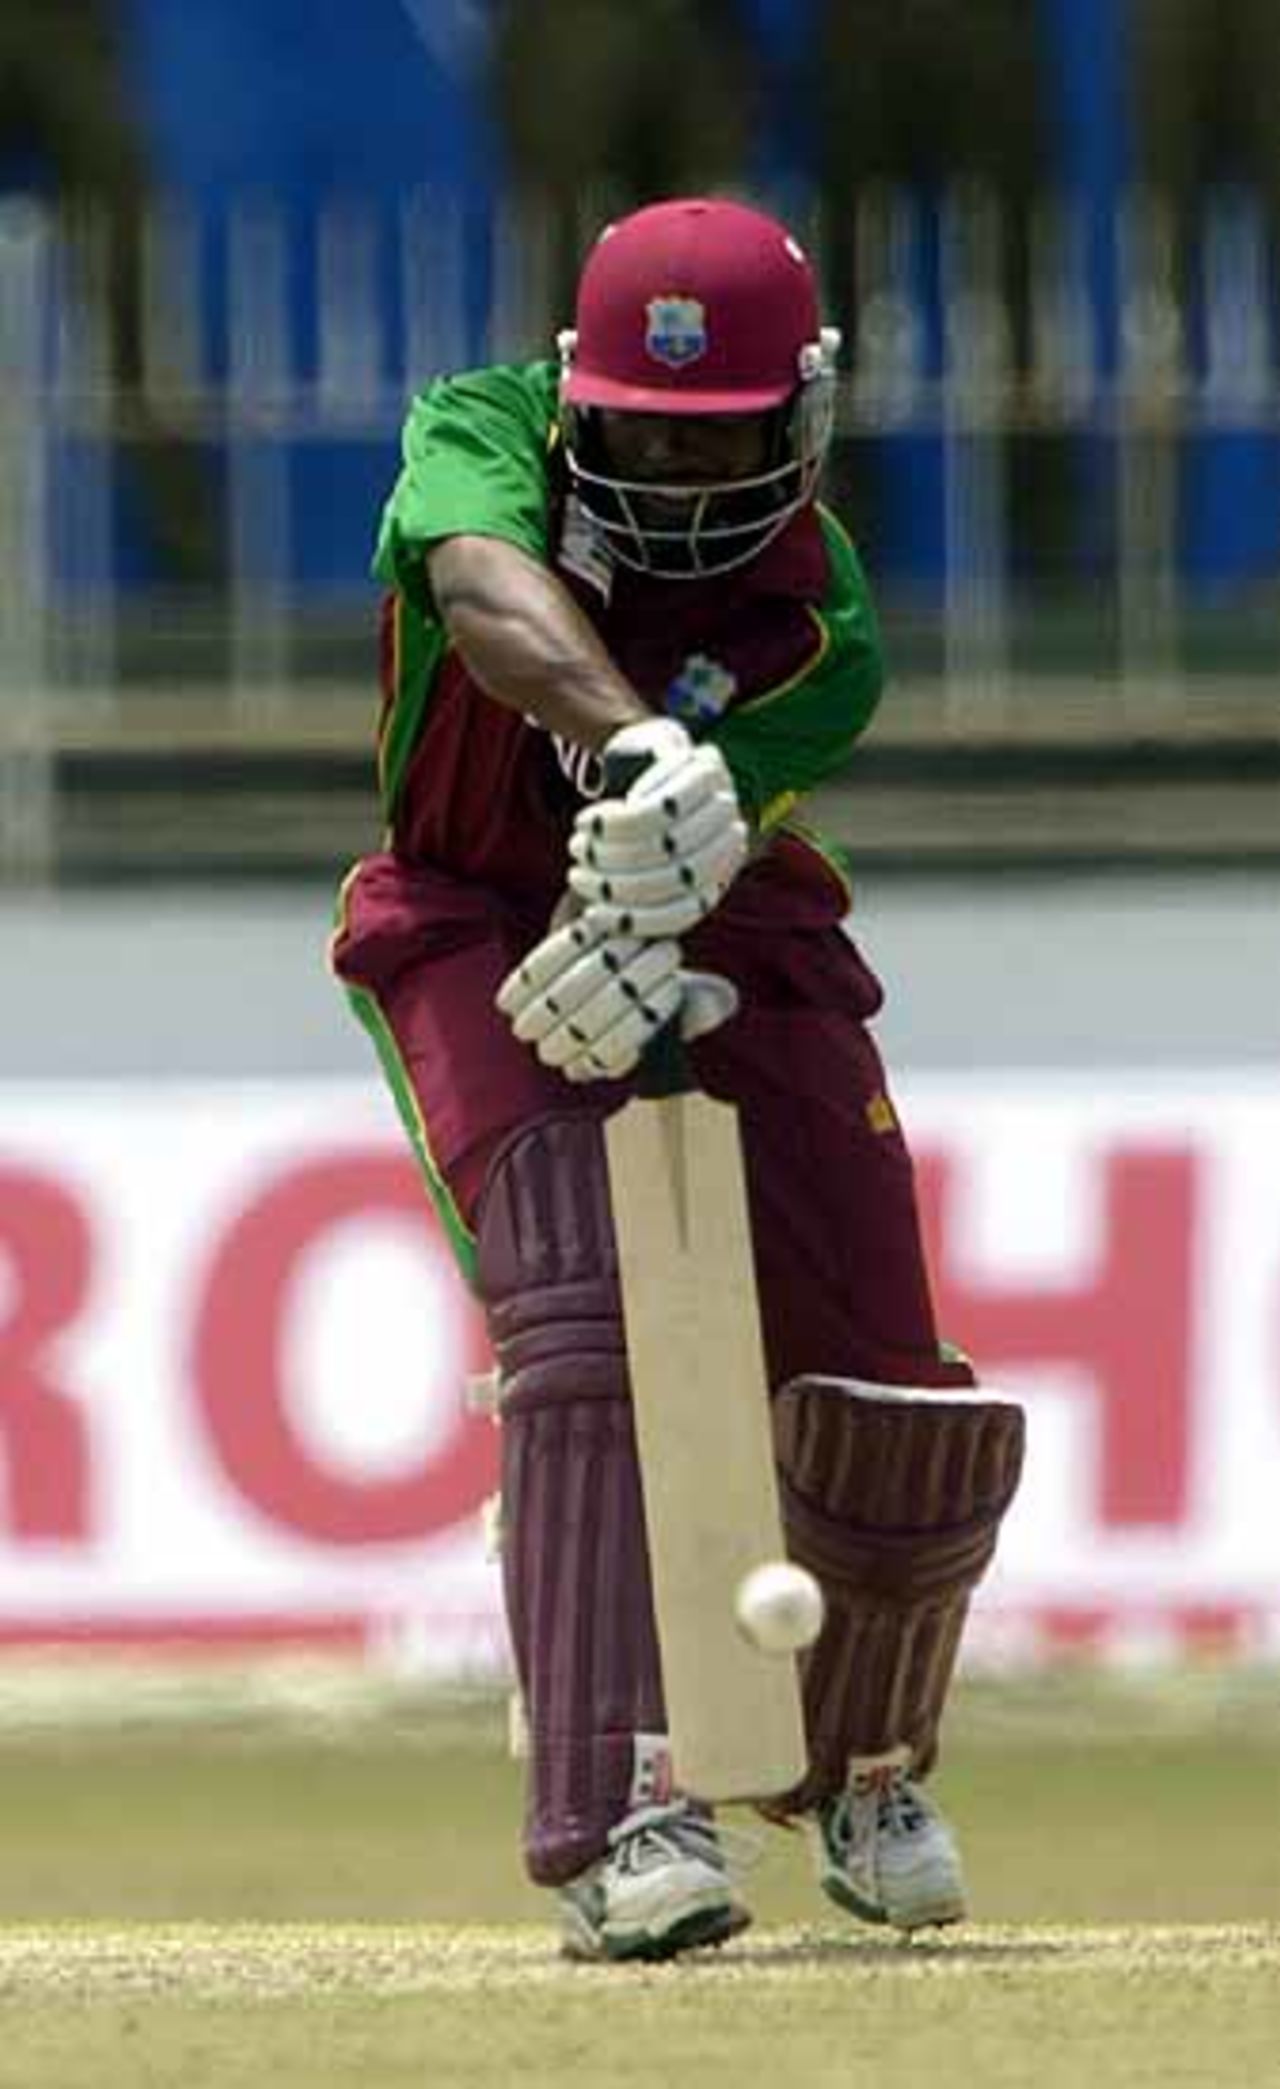 ICC Champions Trophy, South Africa v West Indies, 13th September 2002, Colombo (SSC)